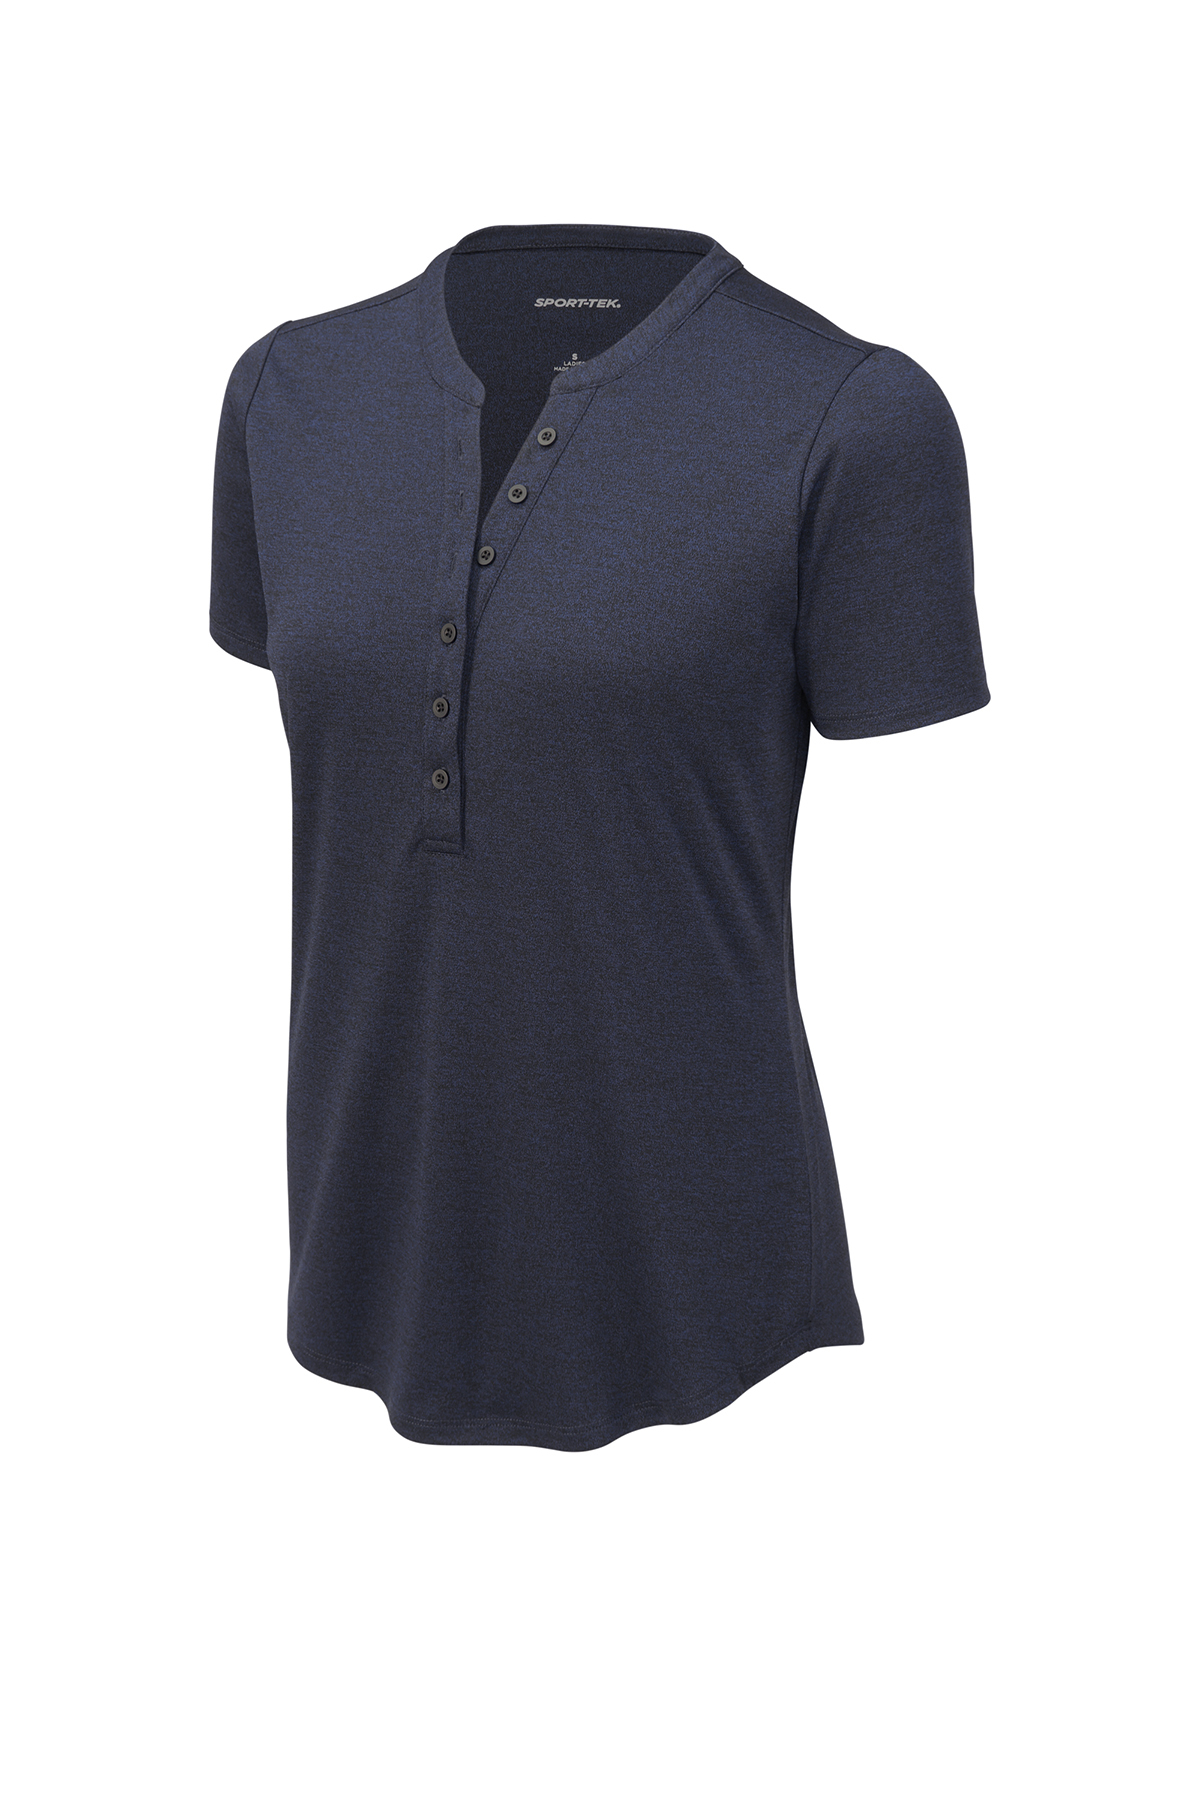 click to view Deep Navy Heather